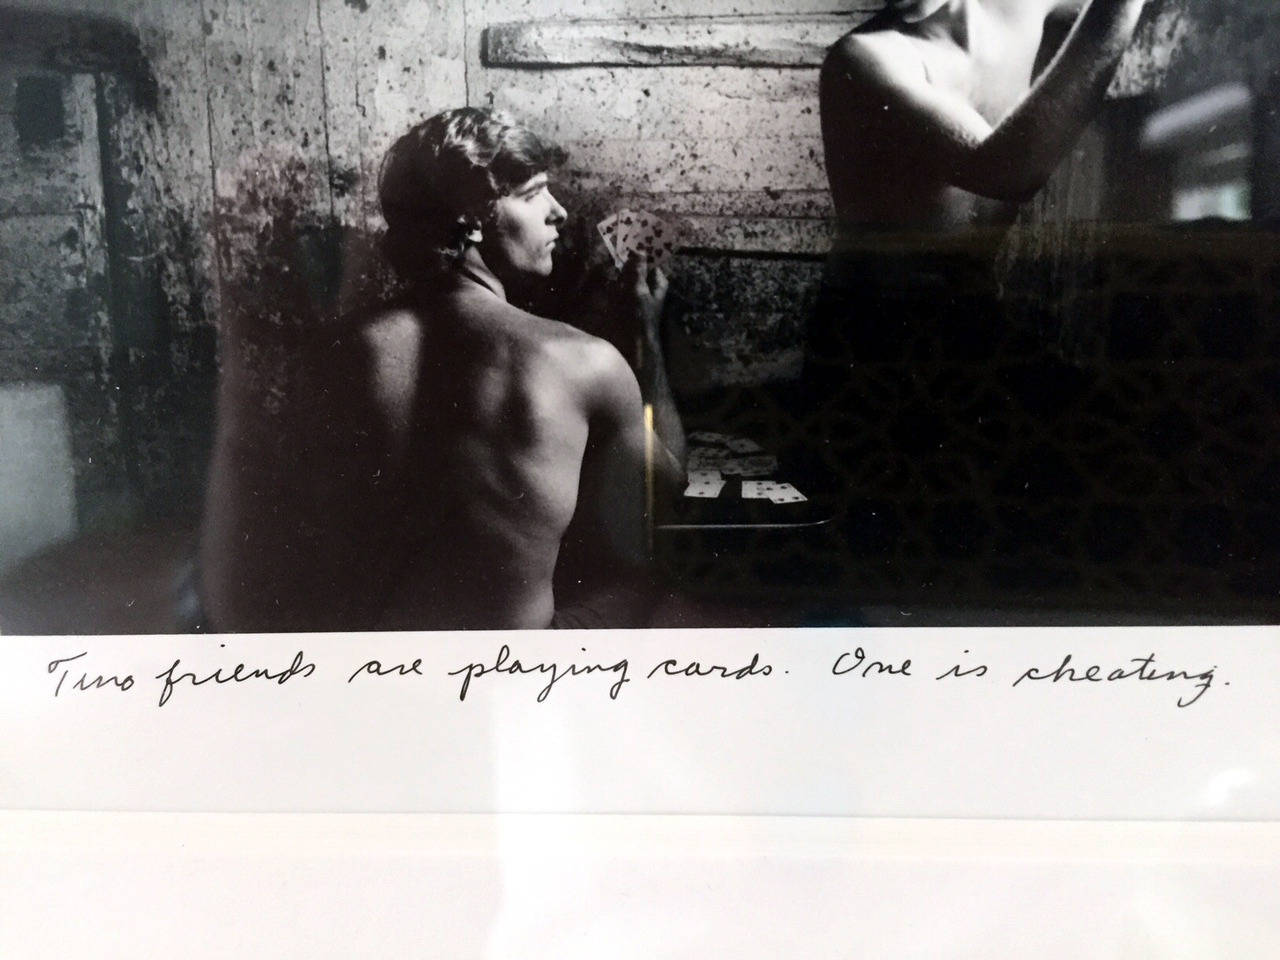 American Framed Photograph by Duane Michals For Sale